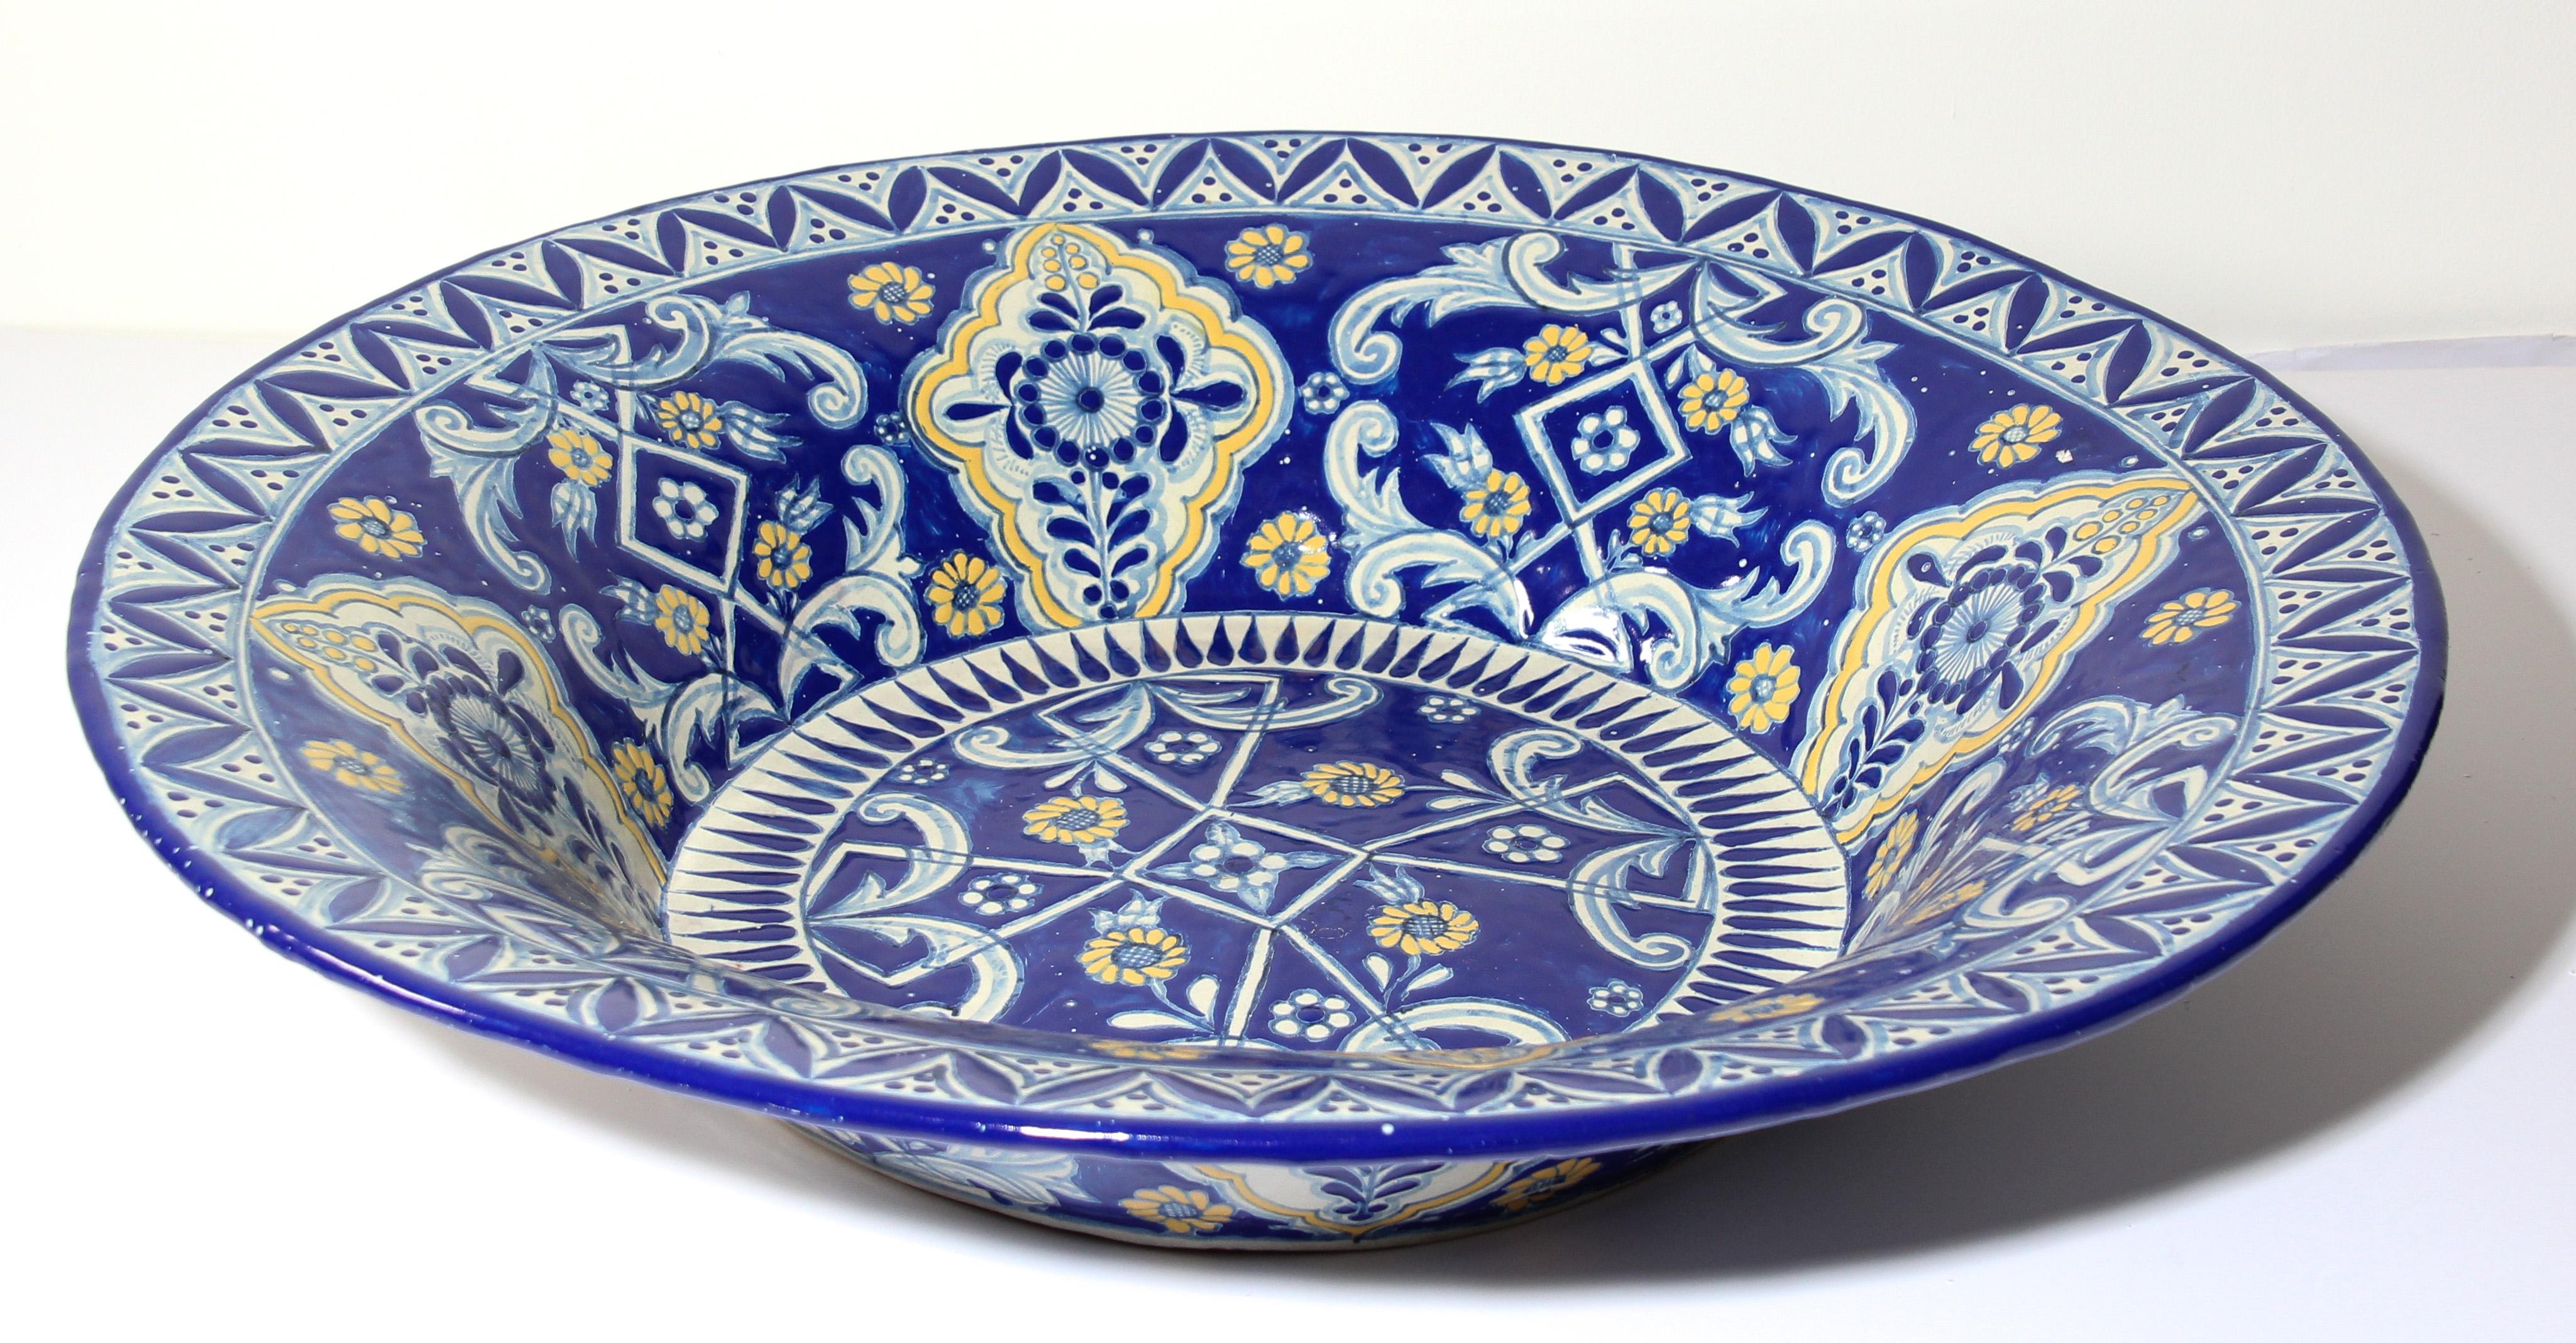 Authentic oversized very fine blue and white Mexican Talavera de la Reina glazed ceramic bowl.
Blue and white Mexican Talavera pottery handcrafted and hand painted with floral designs in shades of blues and yellow.
Hand-painted top and